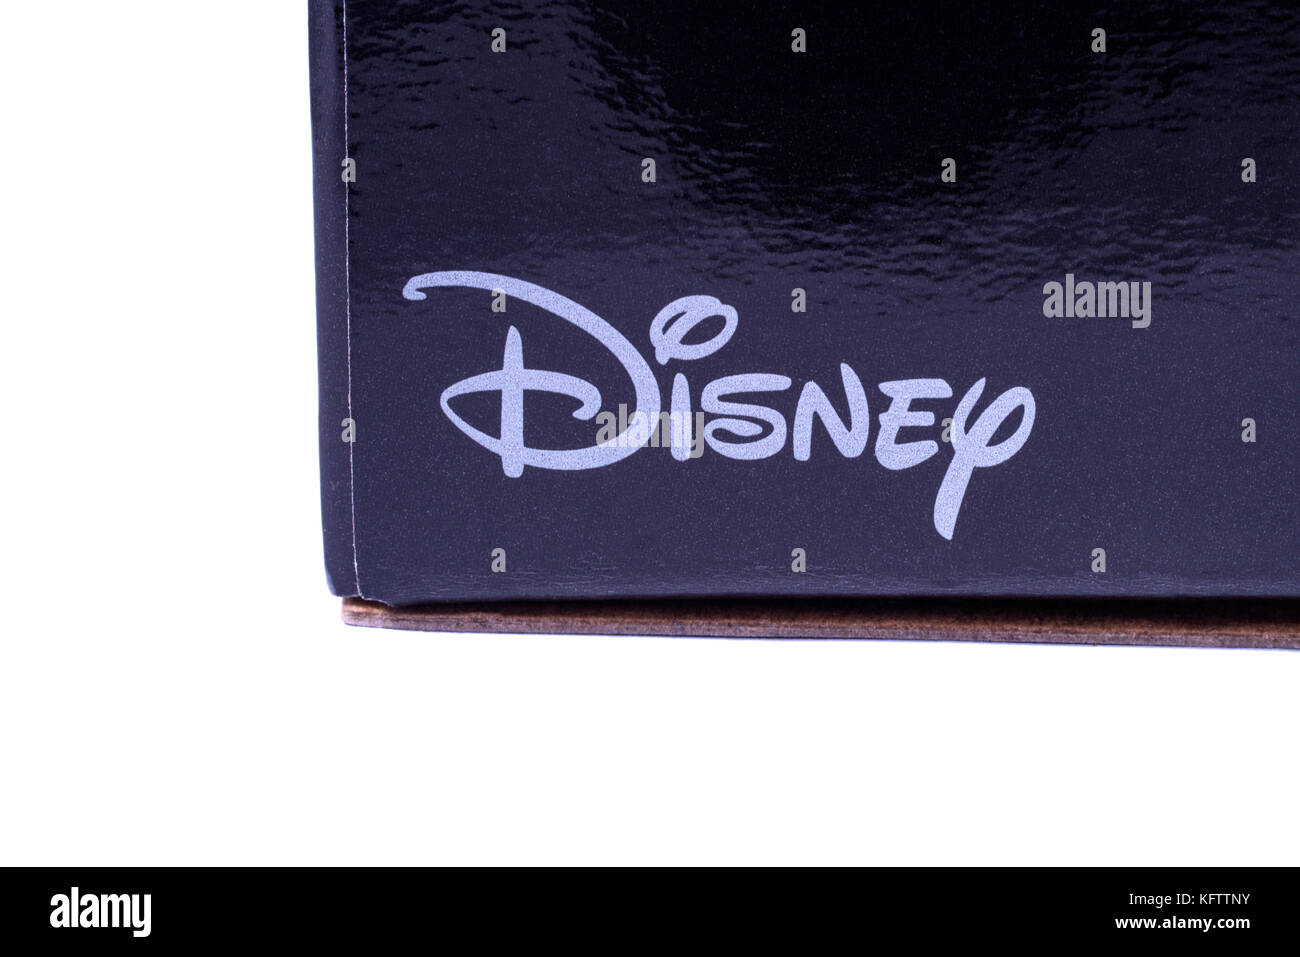 LONDON, UK - OCTOBER 10TH 2017: A close-up of the Disney logo on a product item, on 10th October 2017. Stock Photo